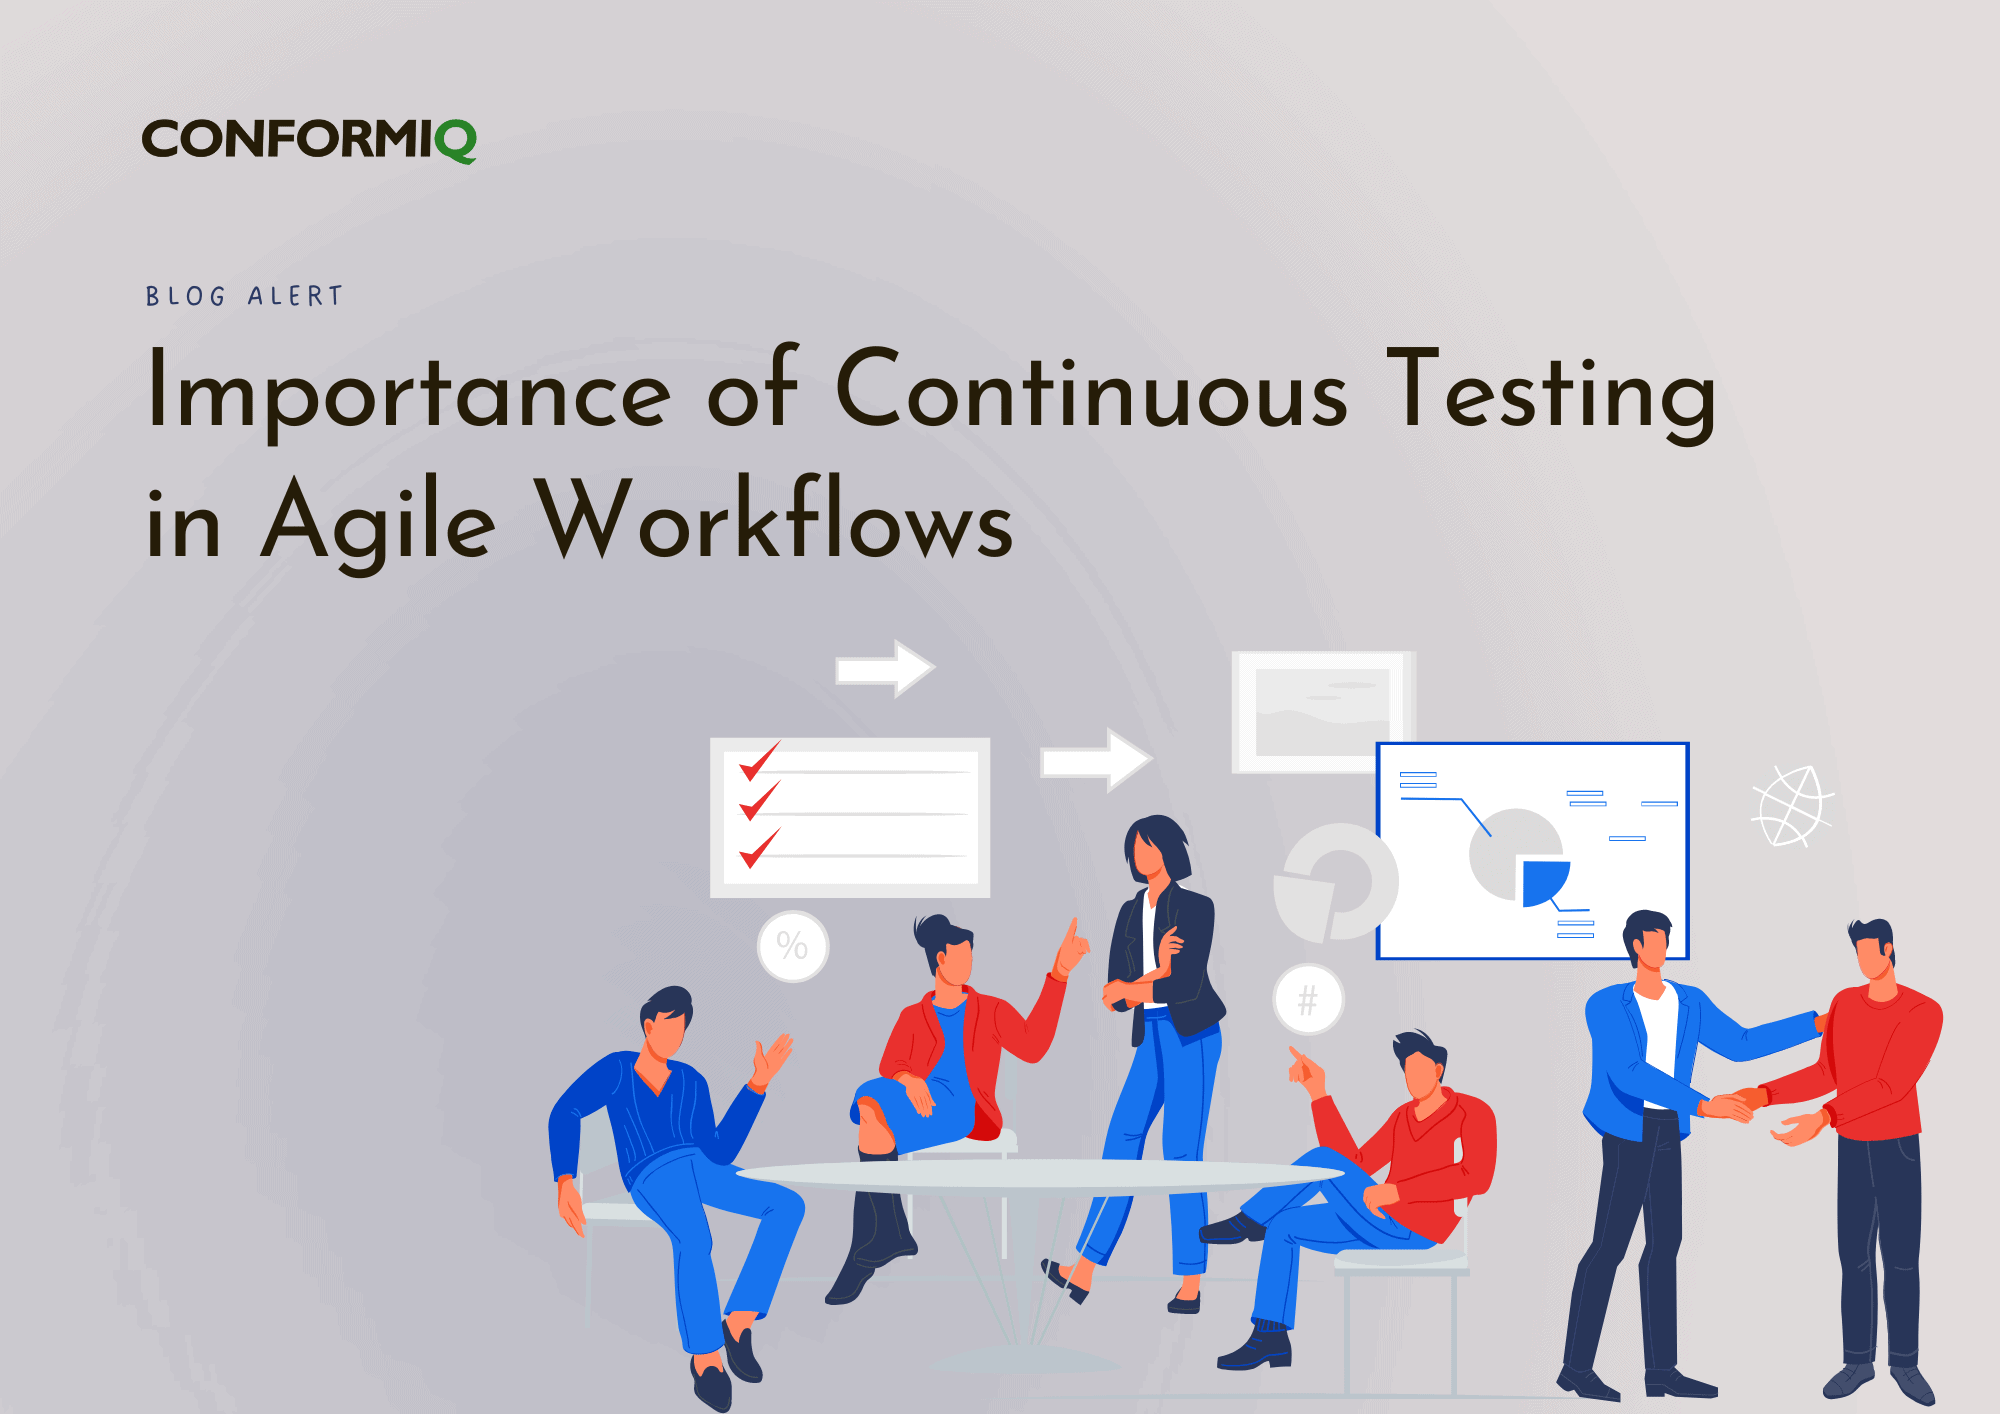 Importance of Continuous Testing in Agile Workflows